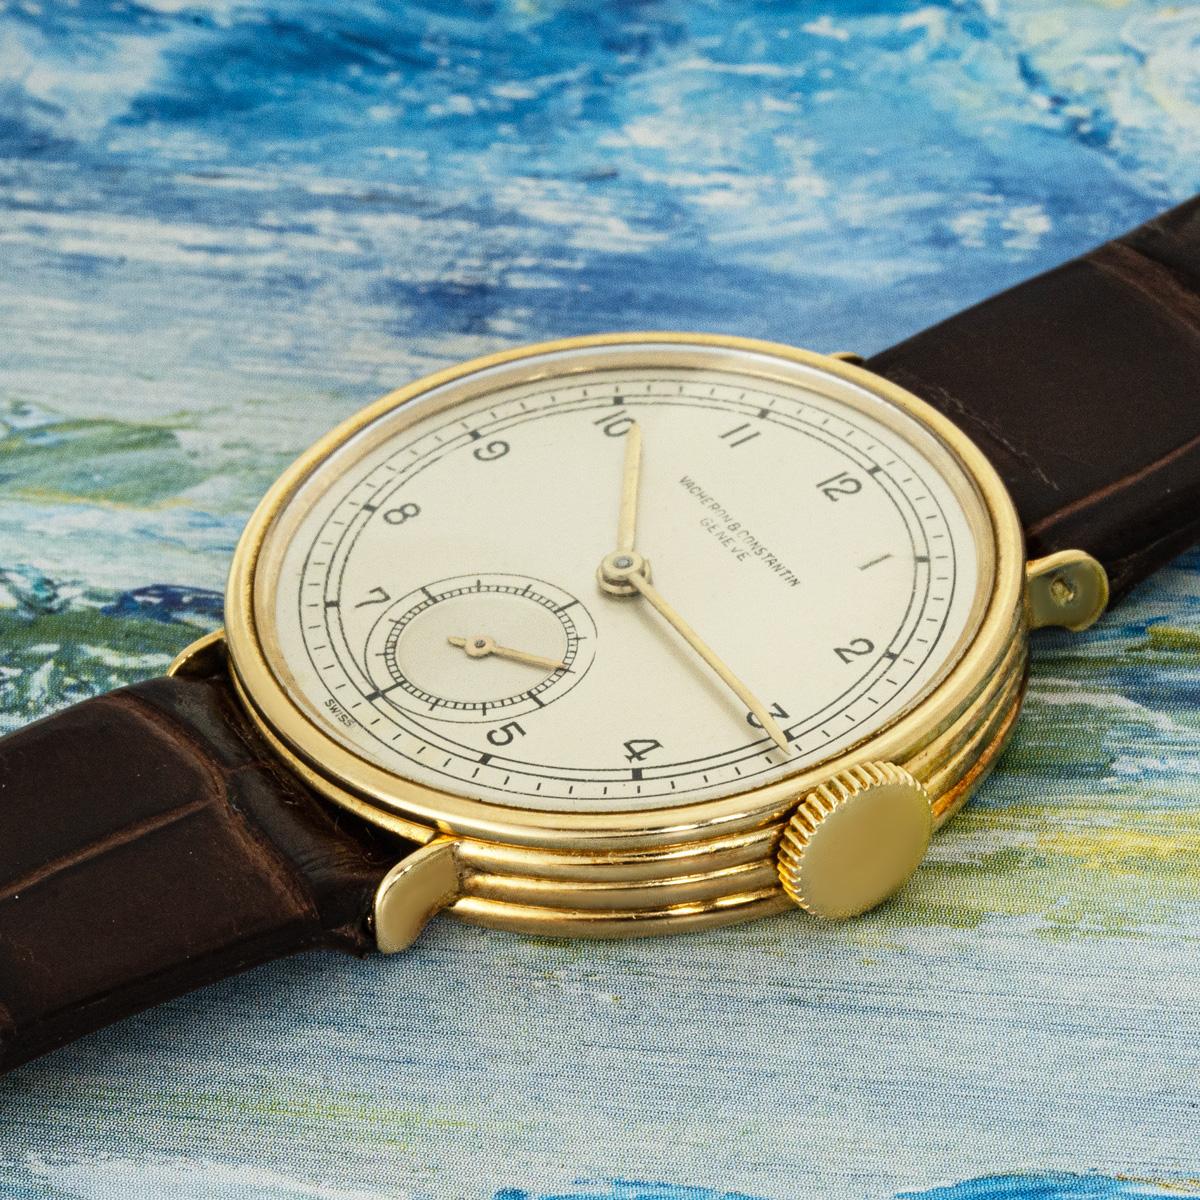 A vintage mens dress watch in yellow gold by Vacheron Constantin. Featuring a silver dial with Arabic numbers and a small seconds display. Fitted with plastic glass, a manual wind movement, and a new generic brown leather strap set with a generic